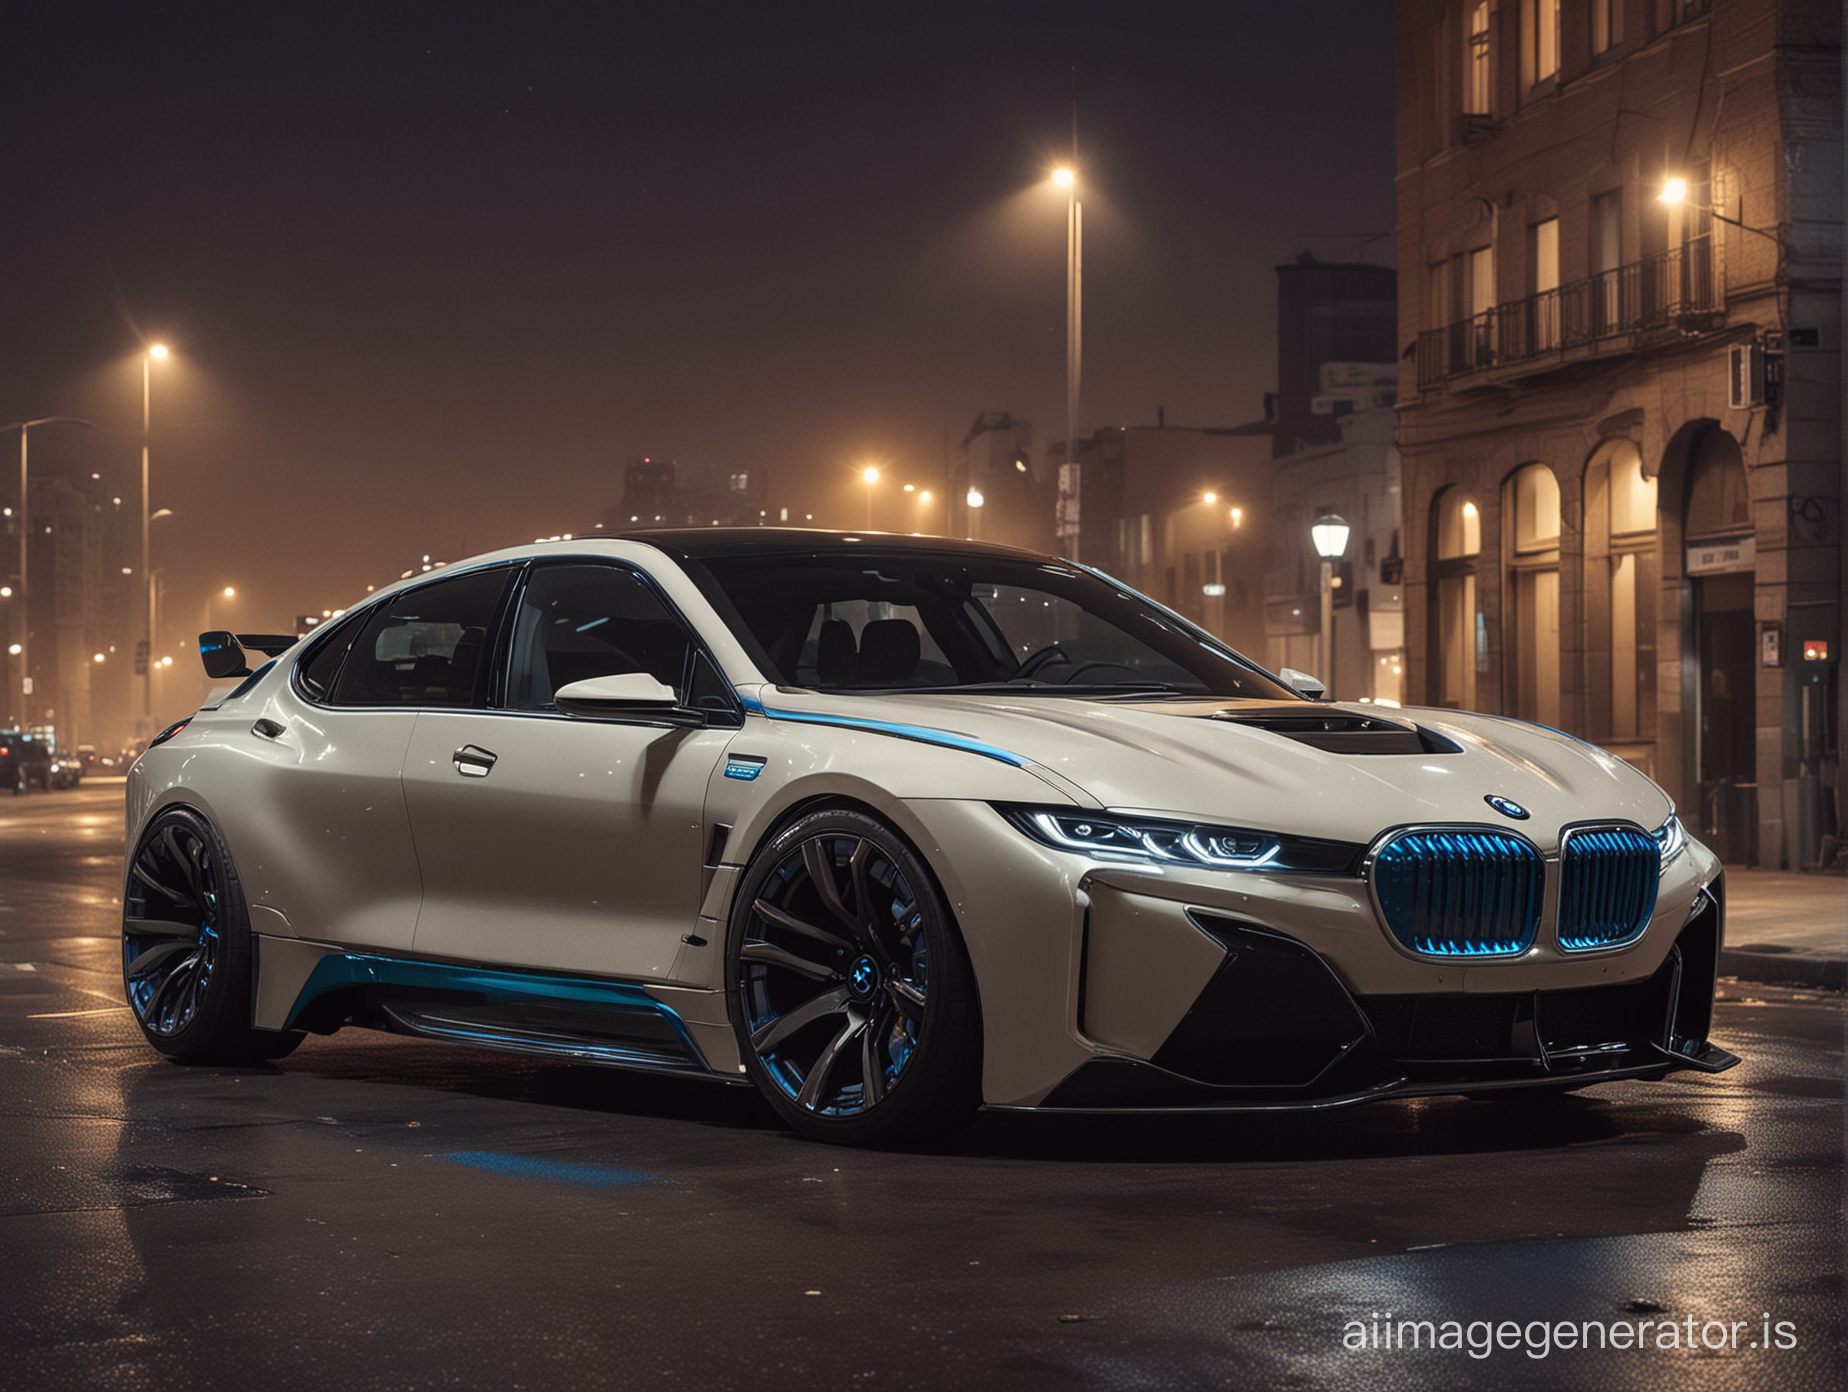 Extreme Khyzyl saleem version of the BMW i7 executive car. Heavy modifications. City at night.